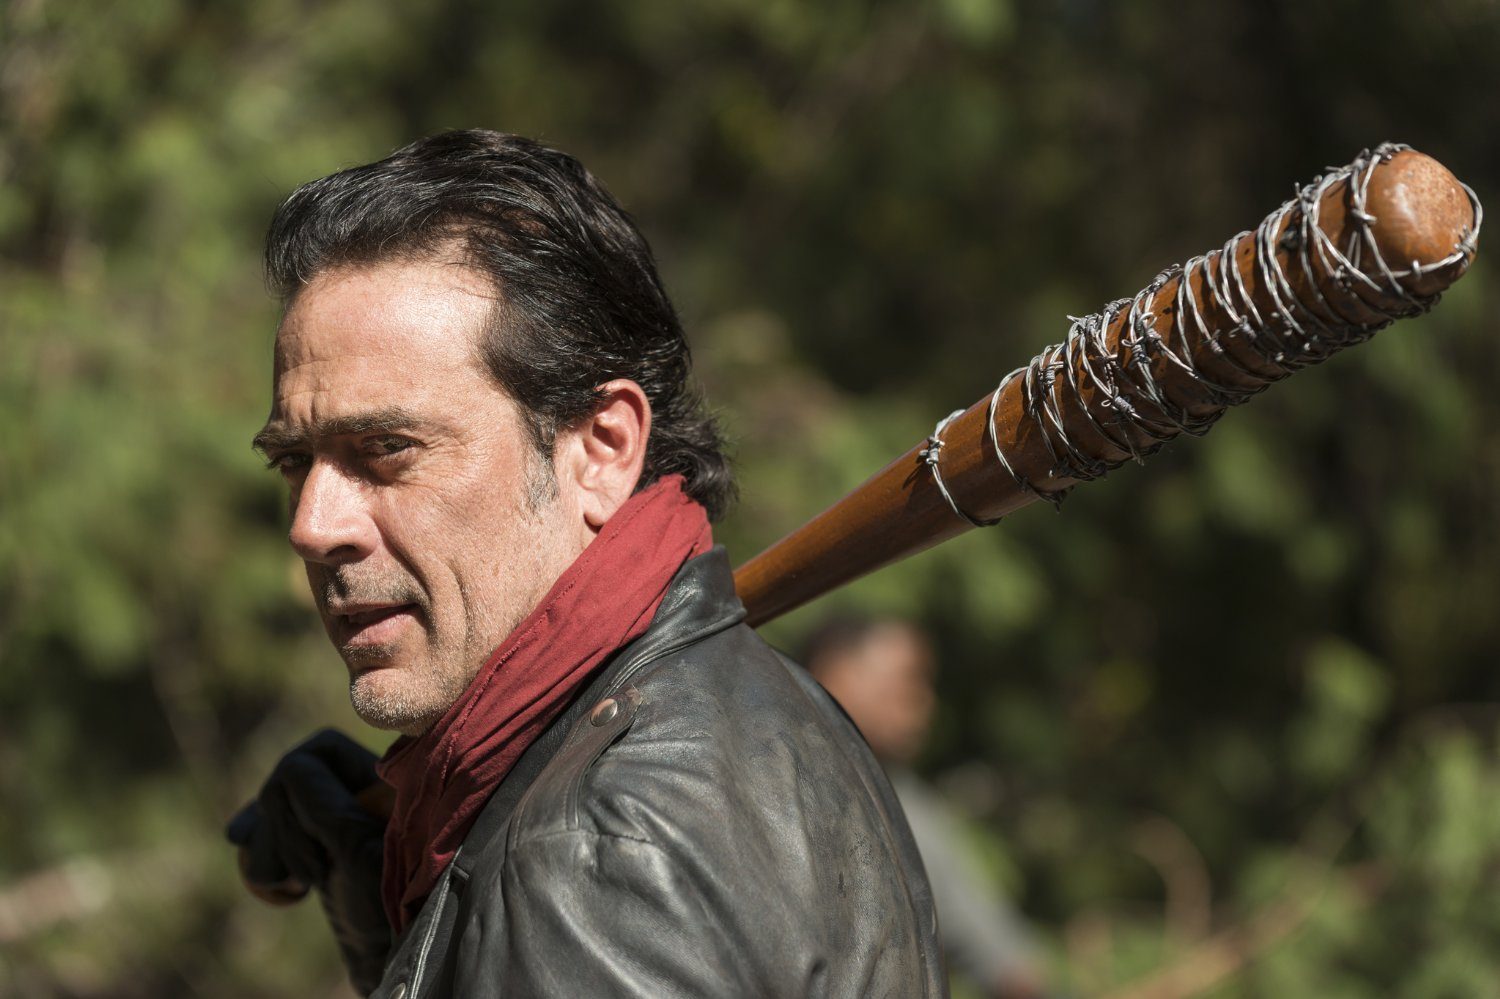 Negan, wearing a red scarf, with a barbed-wire baseball bat on his shoulder